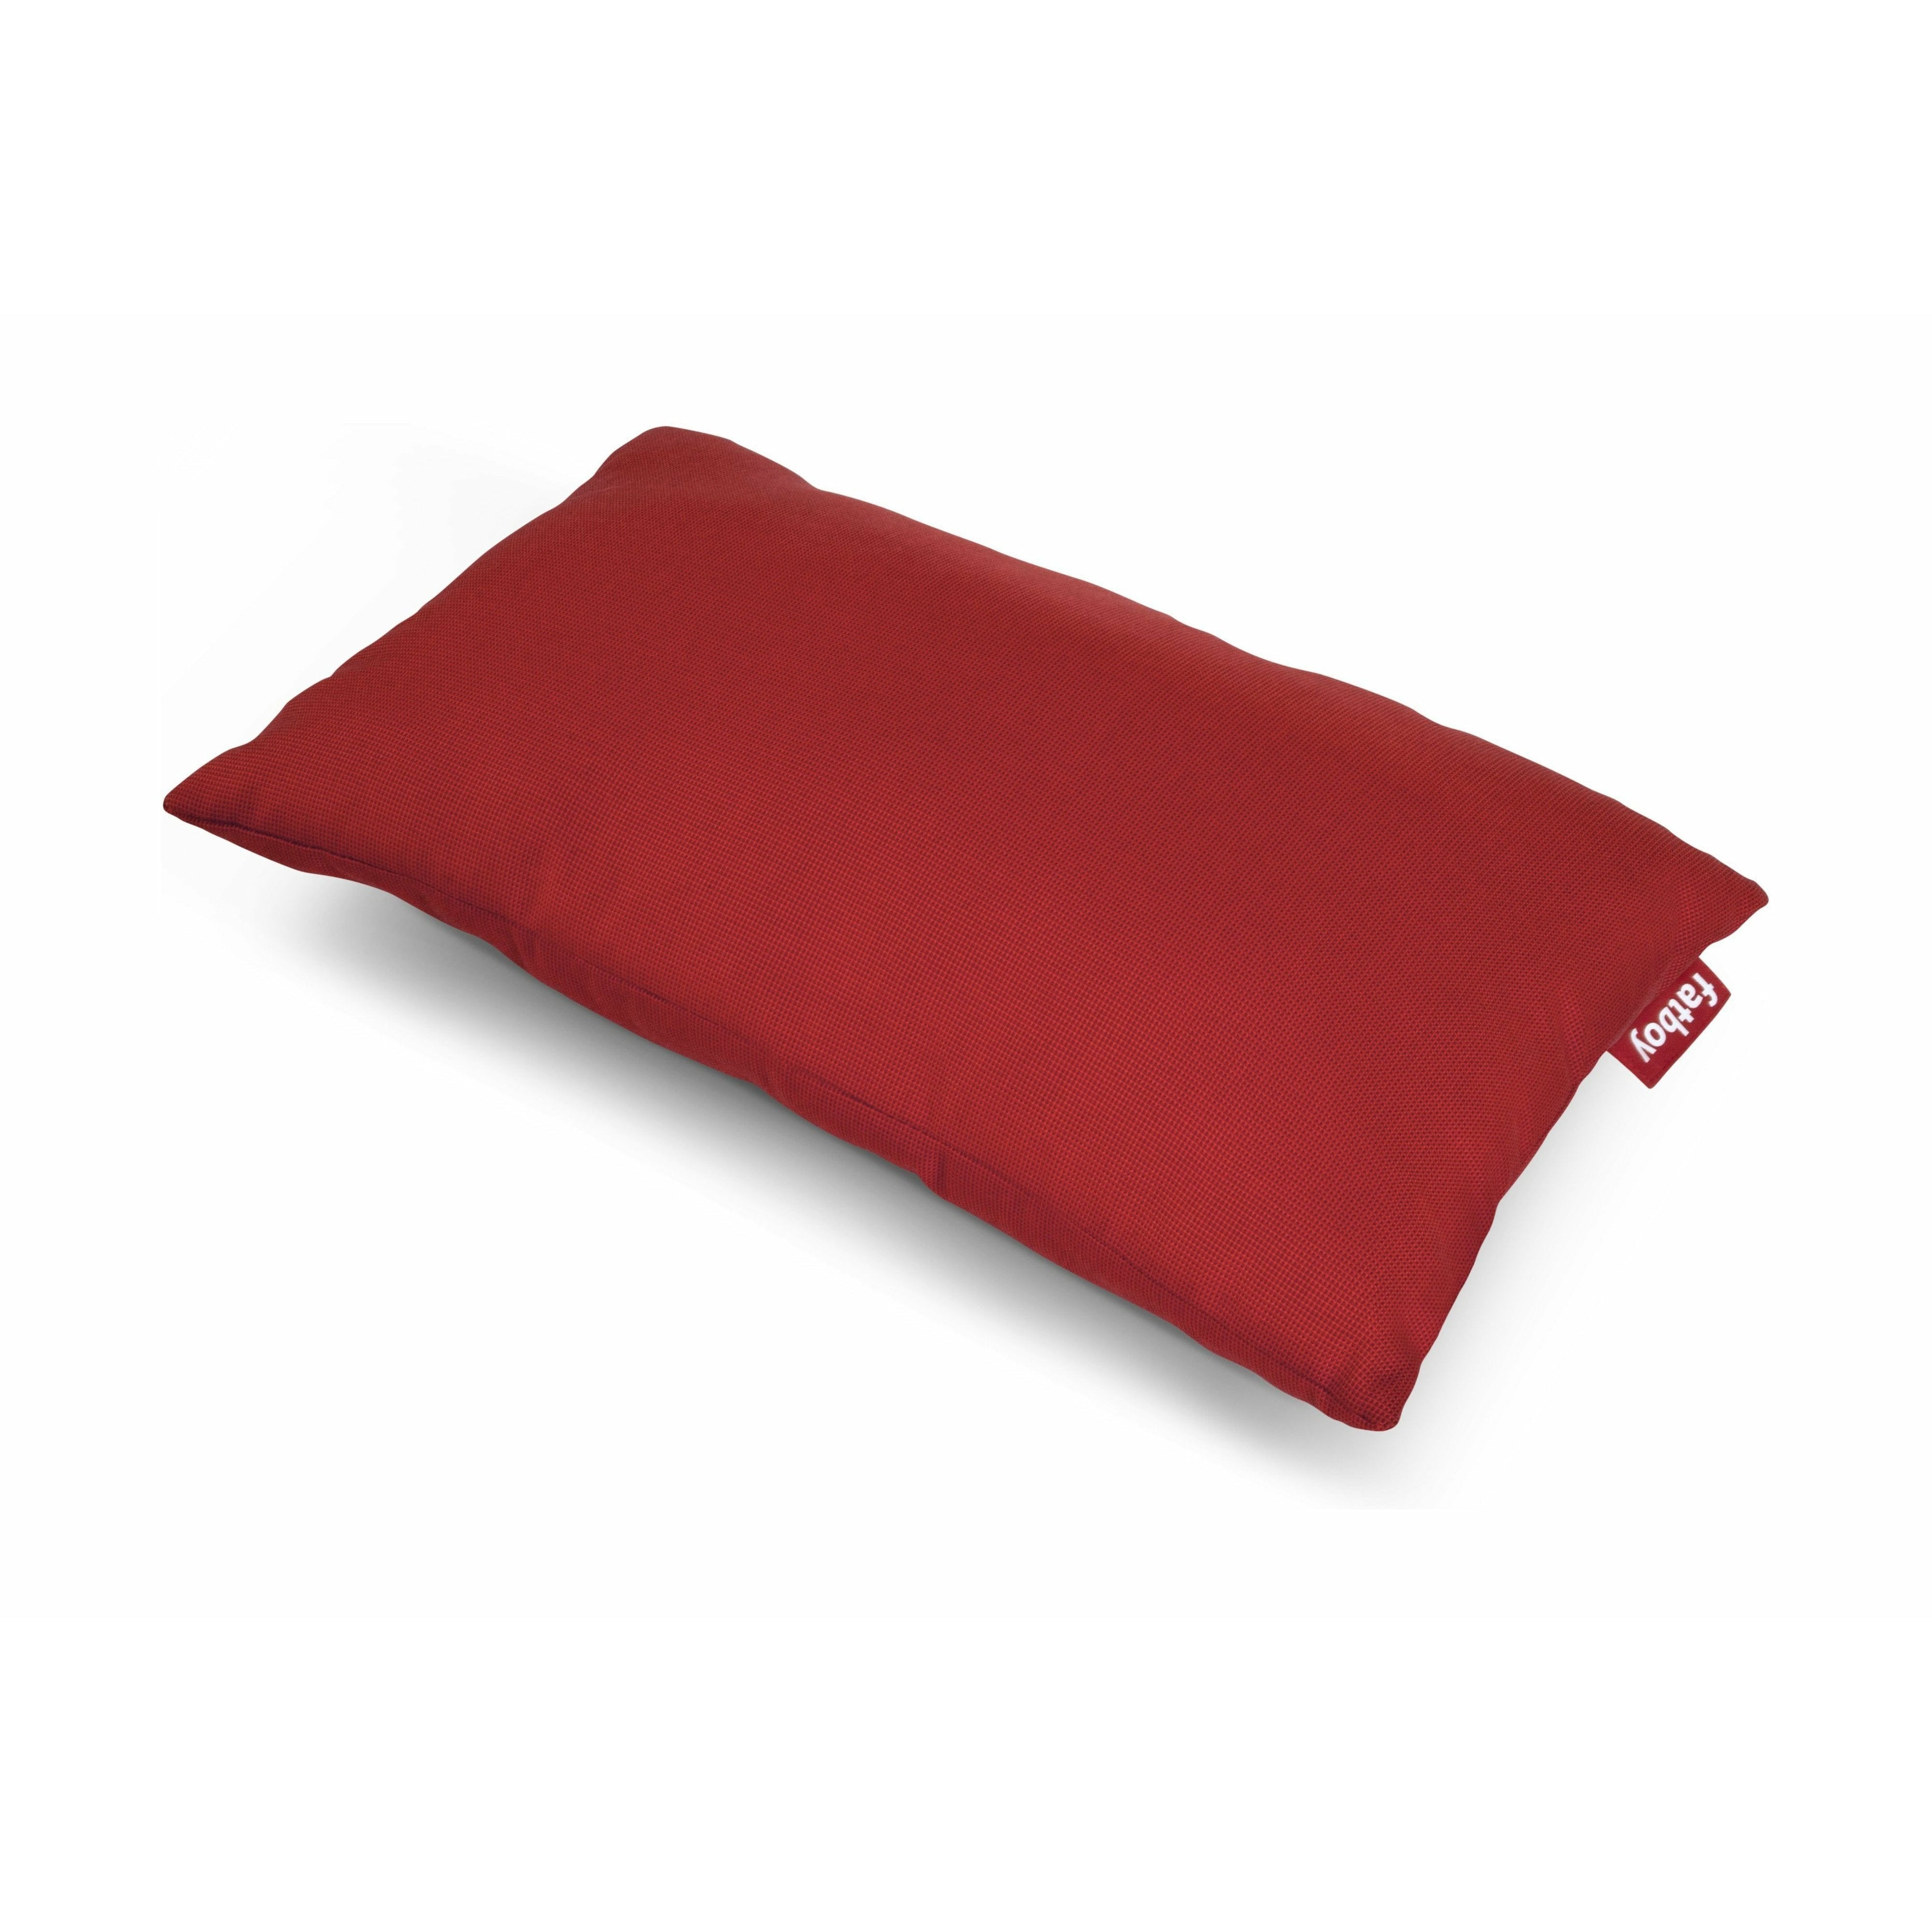 Fatboy Pillow King Outdoor, rood